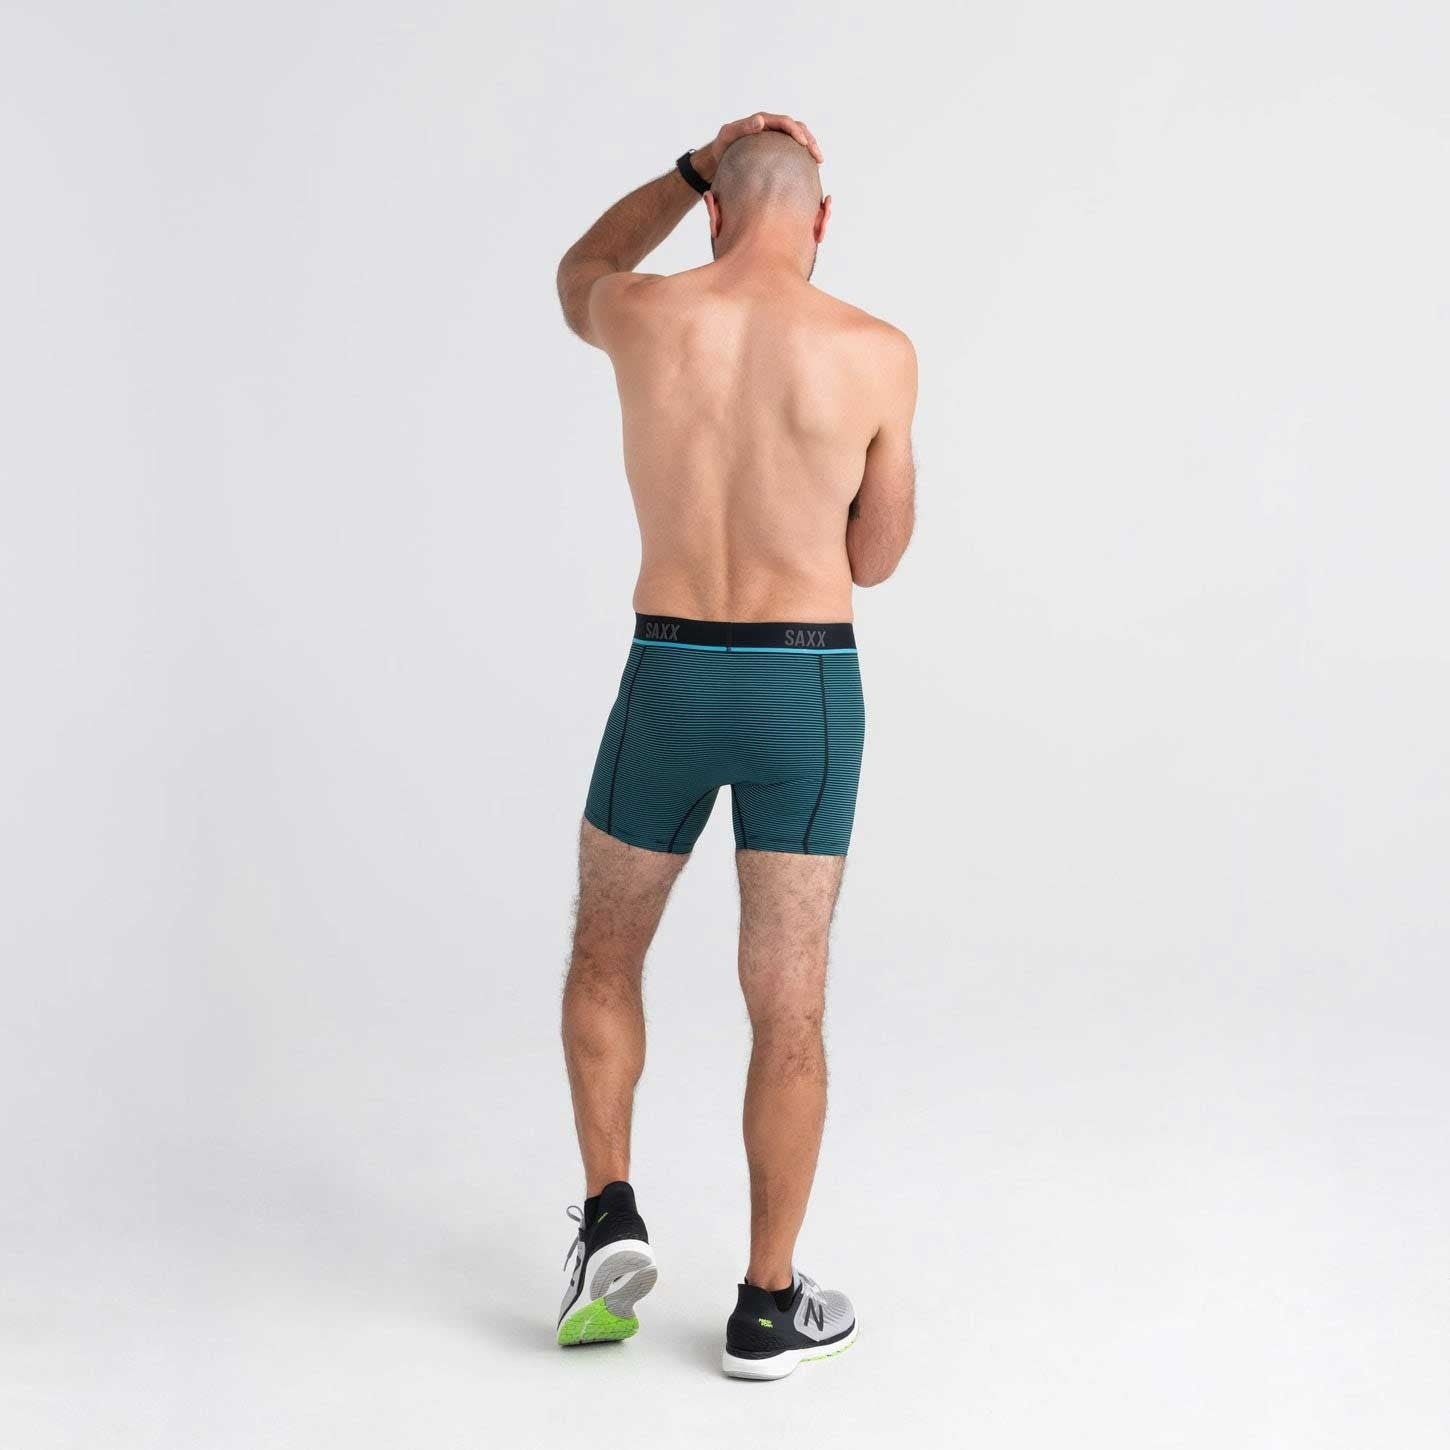 Quest Quick Dry Performance Boxer MBII XL by Saxx Underwear